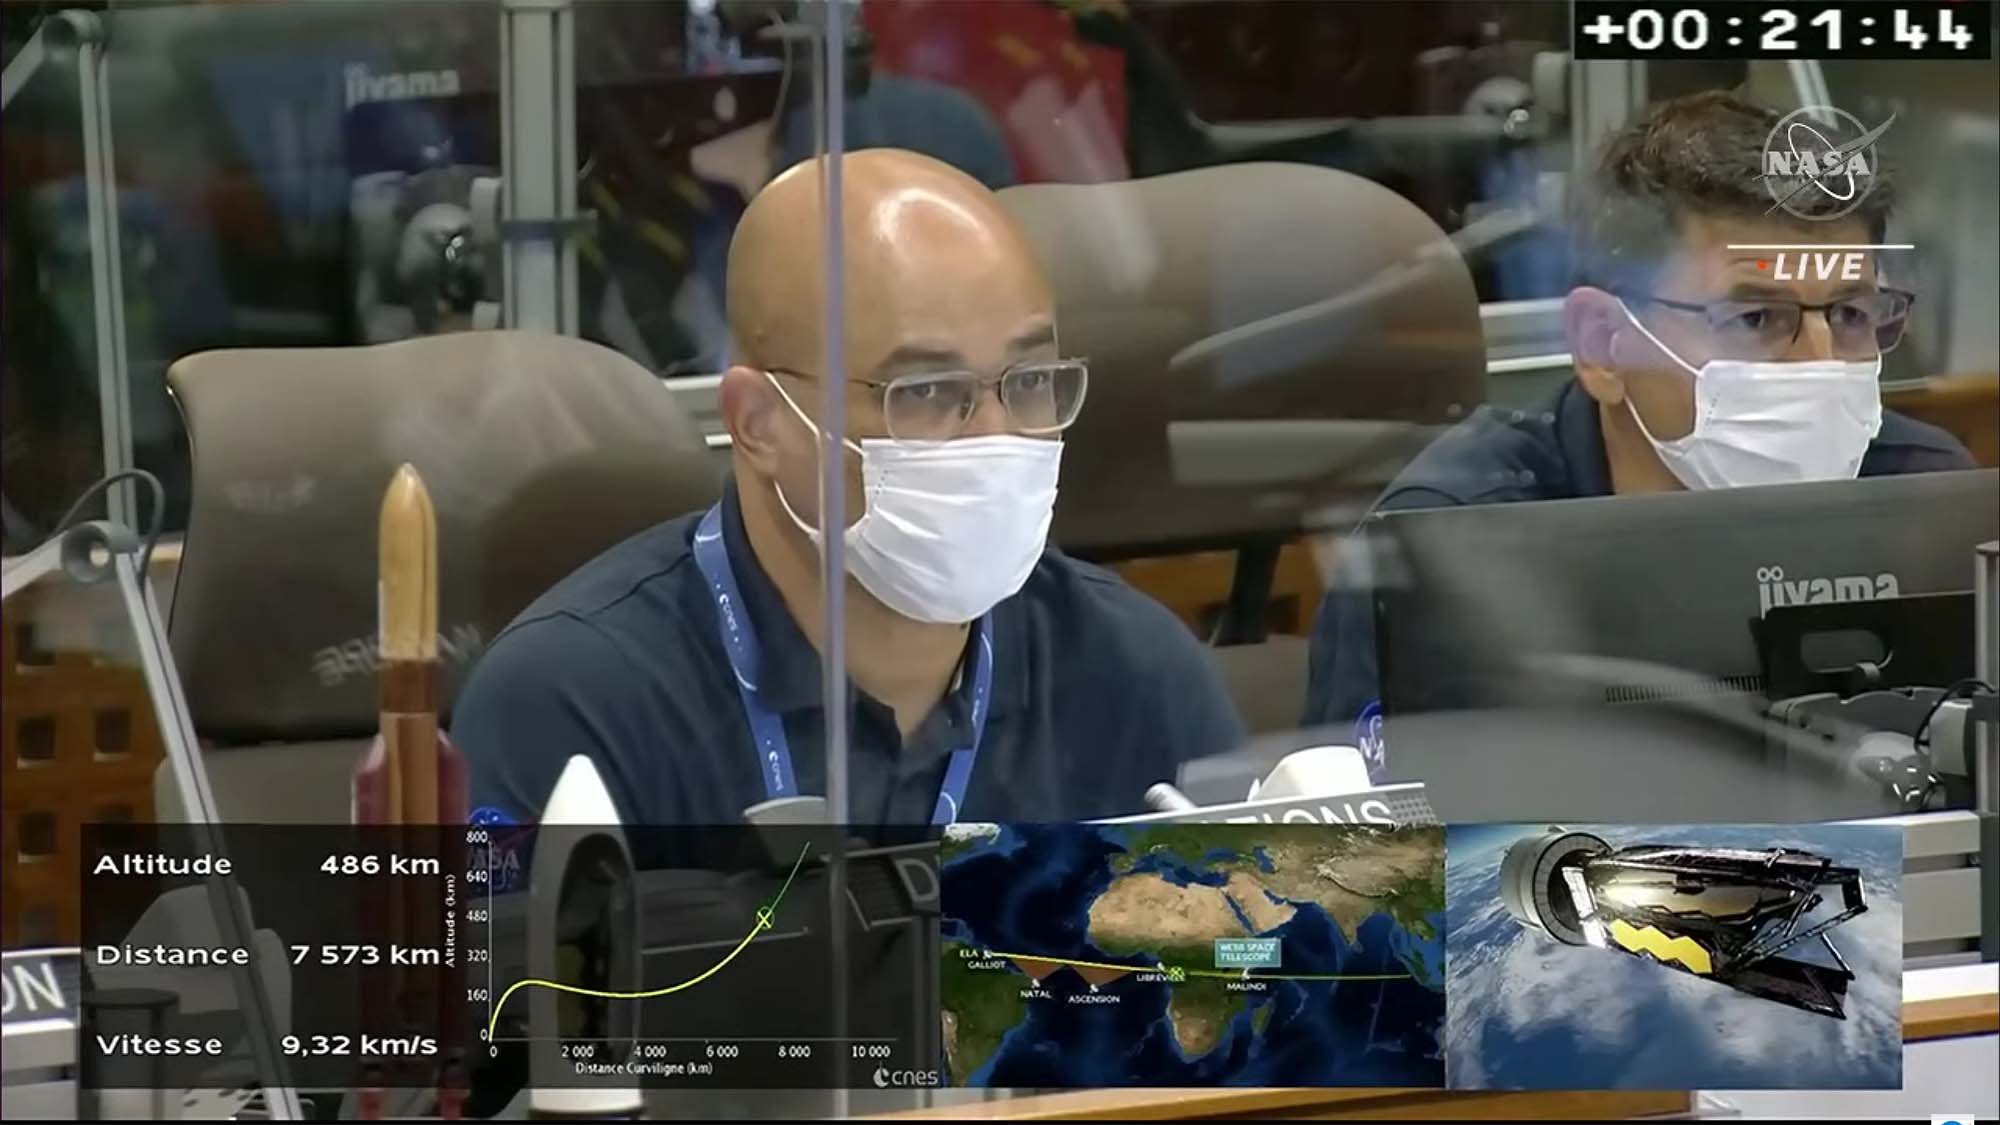 Jean Luc Boyer in the launch control center for the James Webb Space Telescope launch